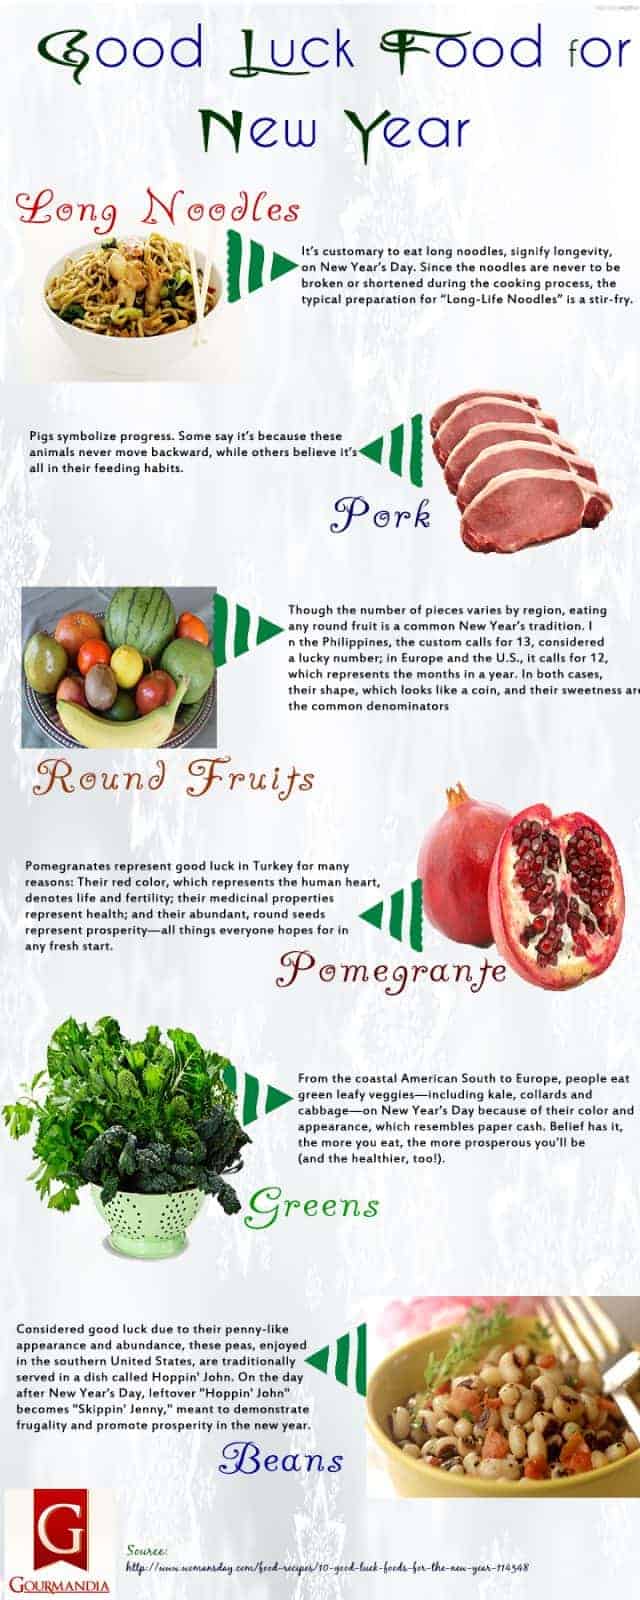 Good Luck Food Infographic